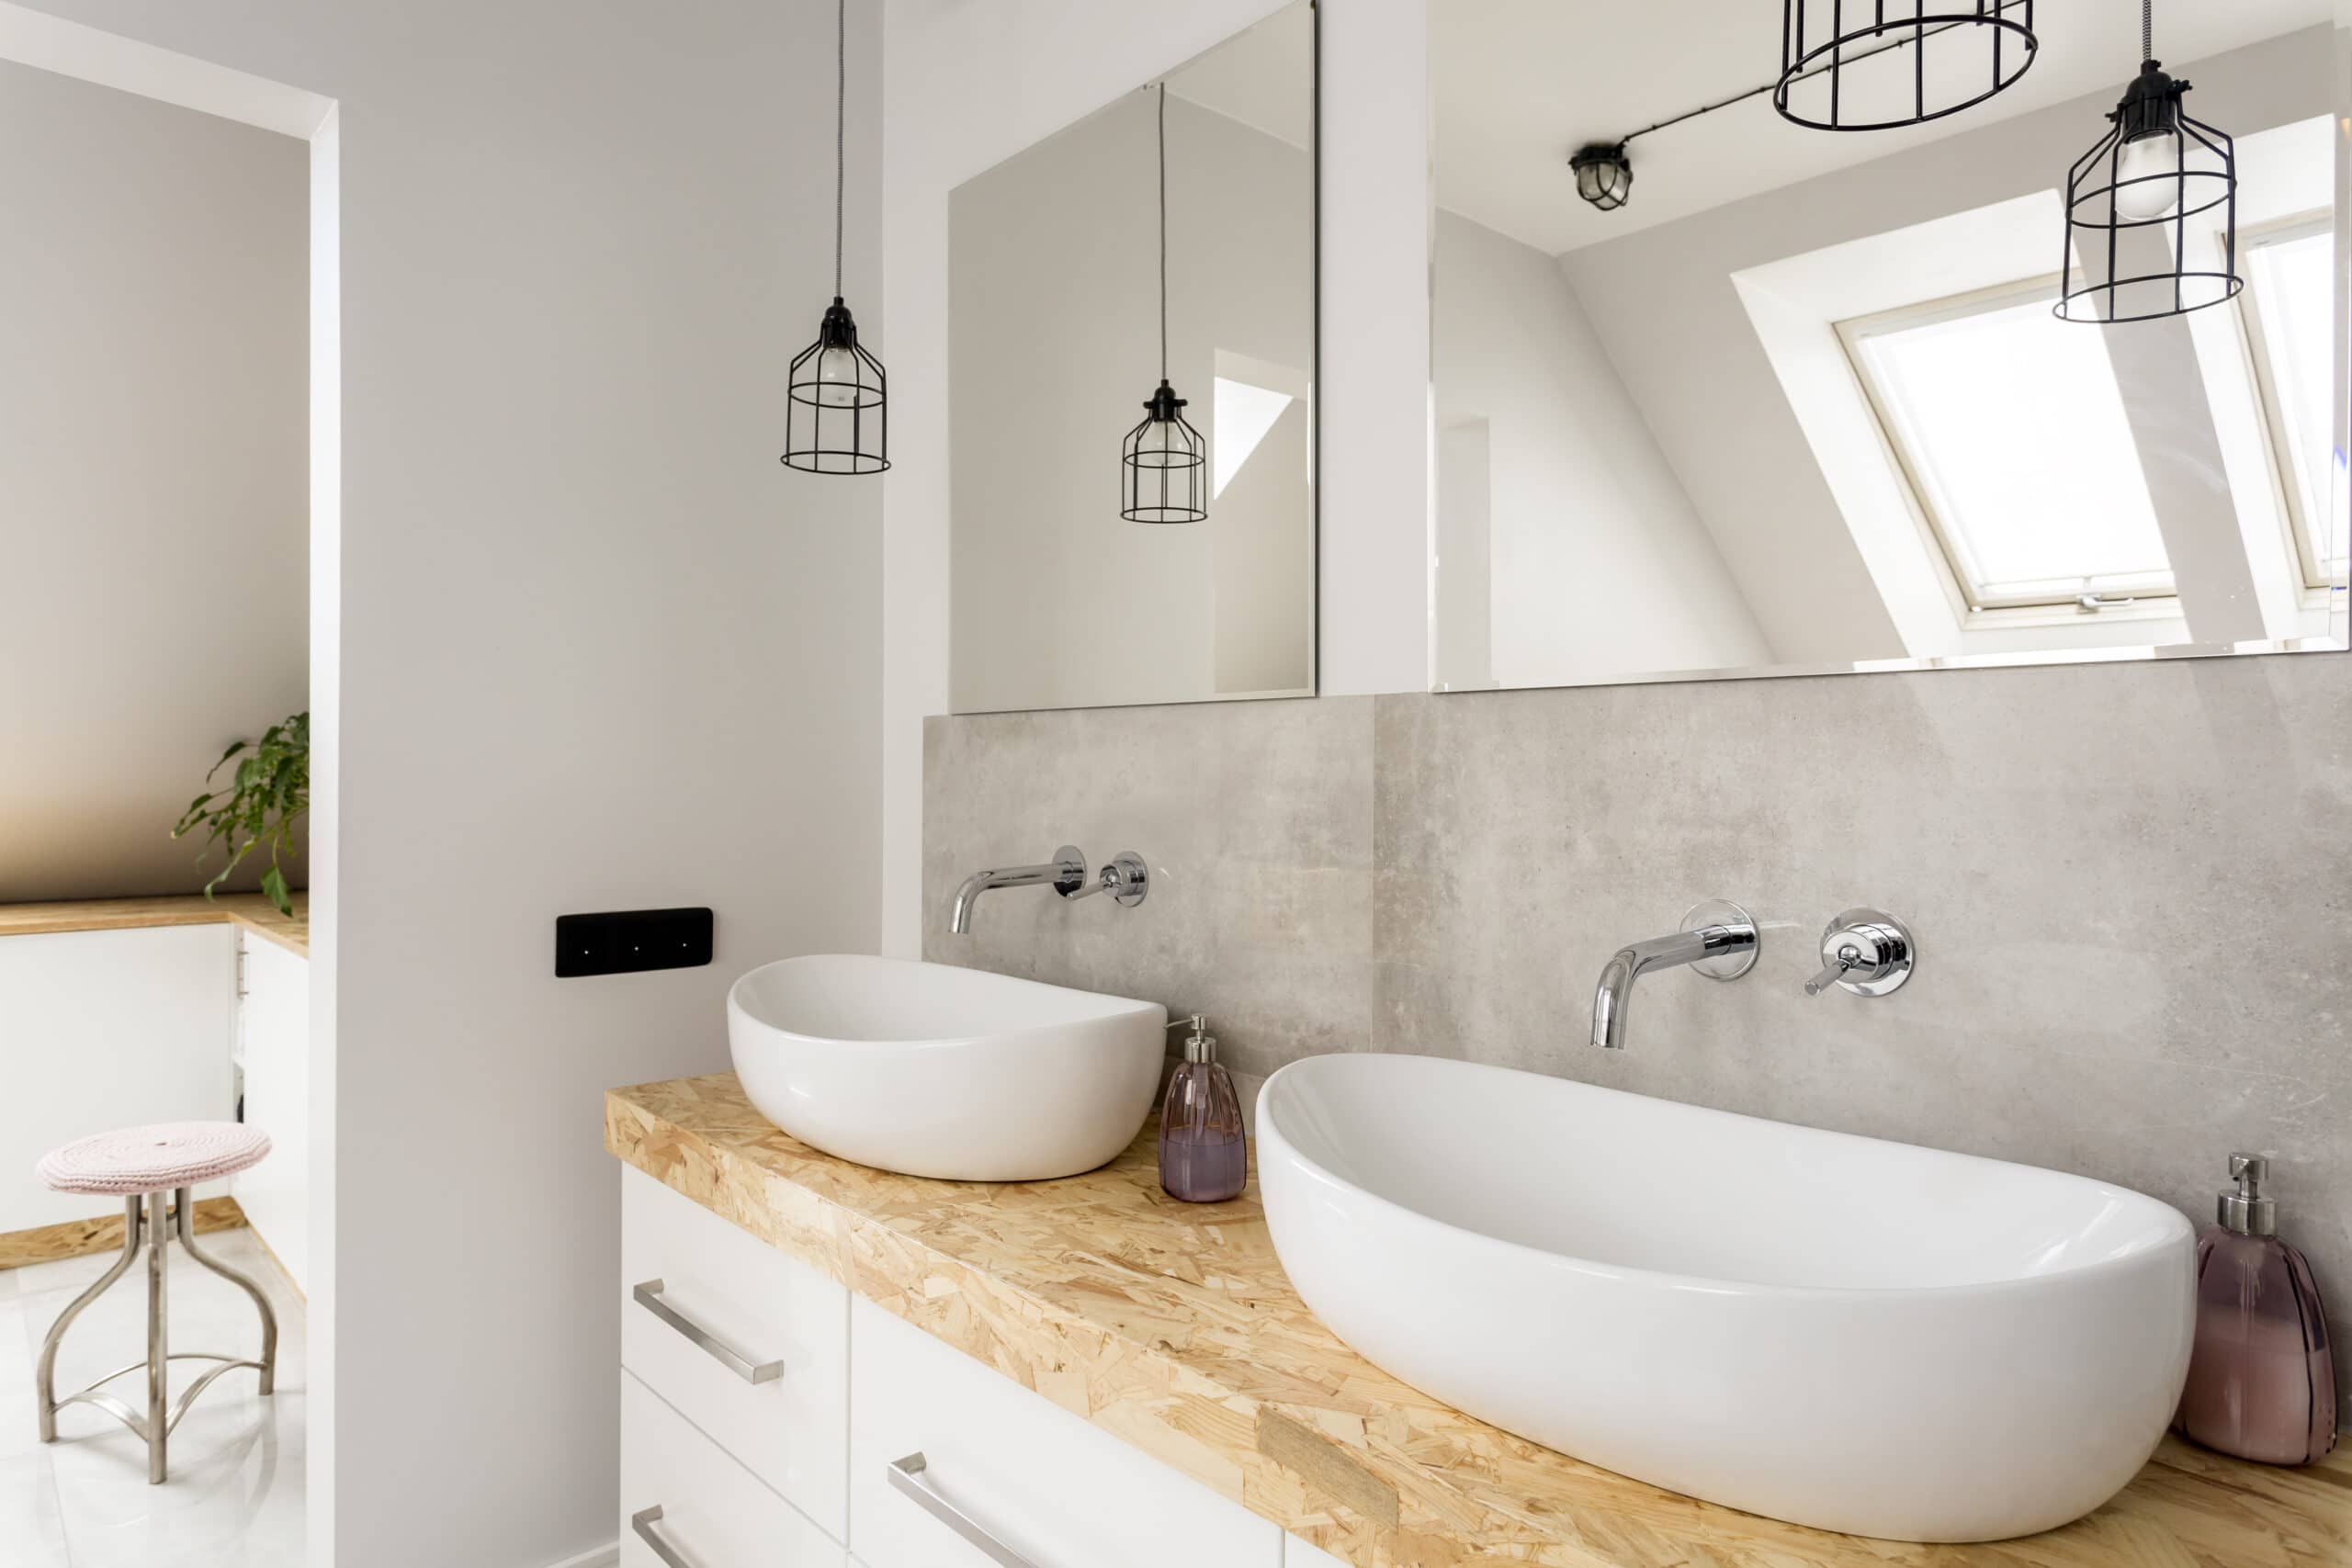 Vancouver Renovation Photos: Two white sinks in a modern bathroom.